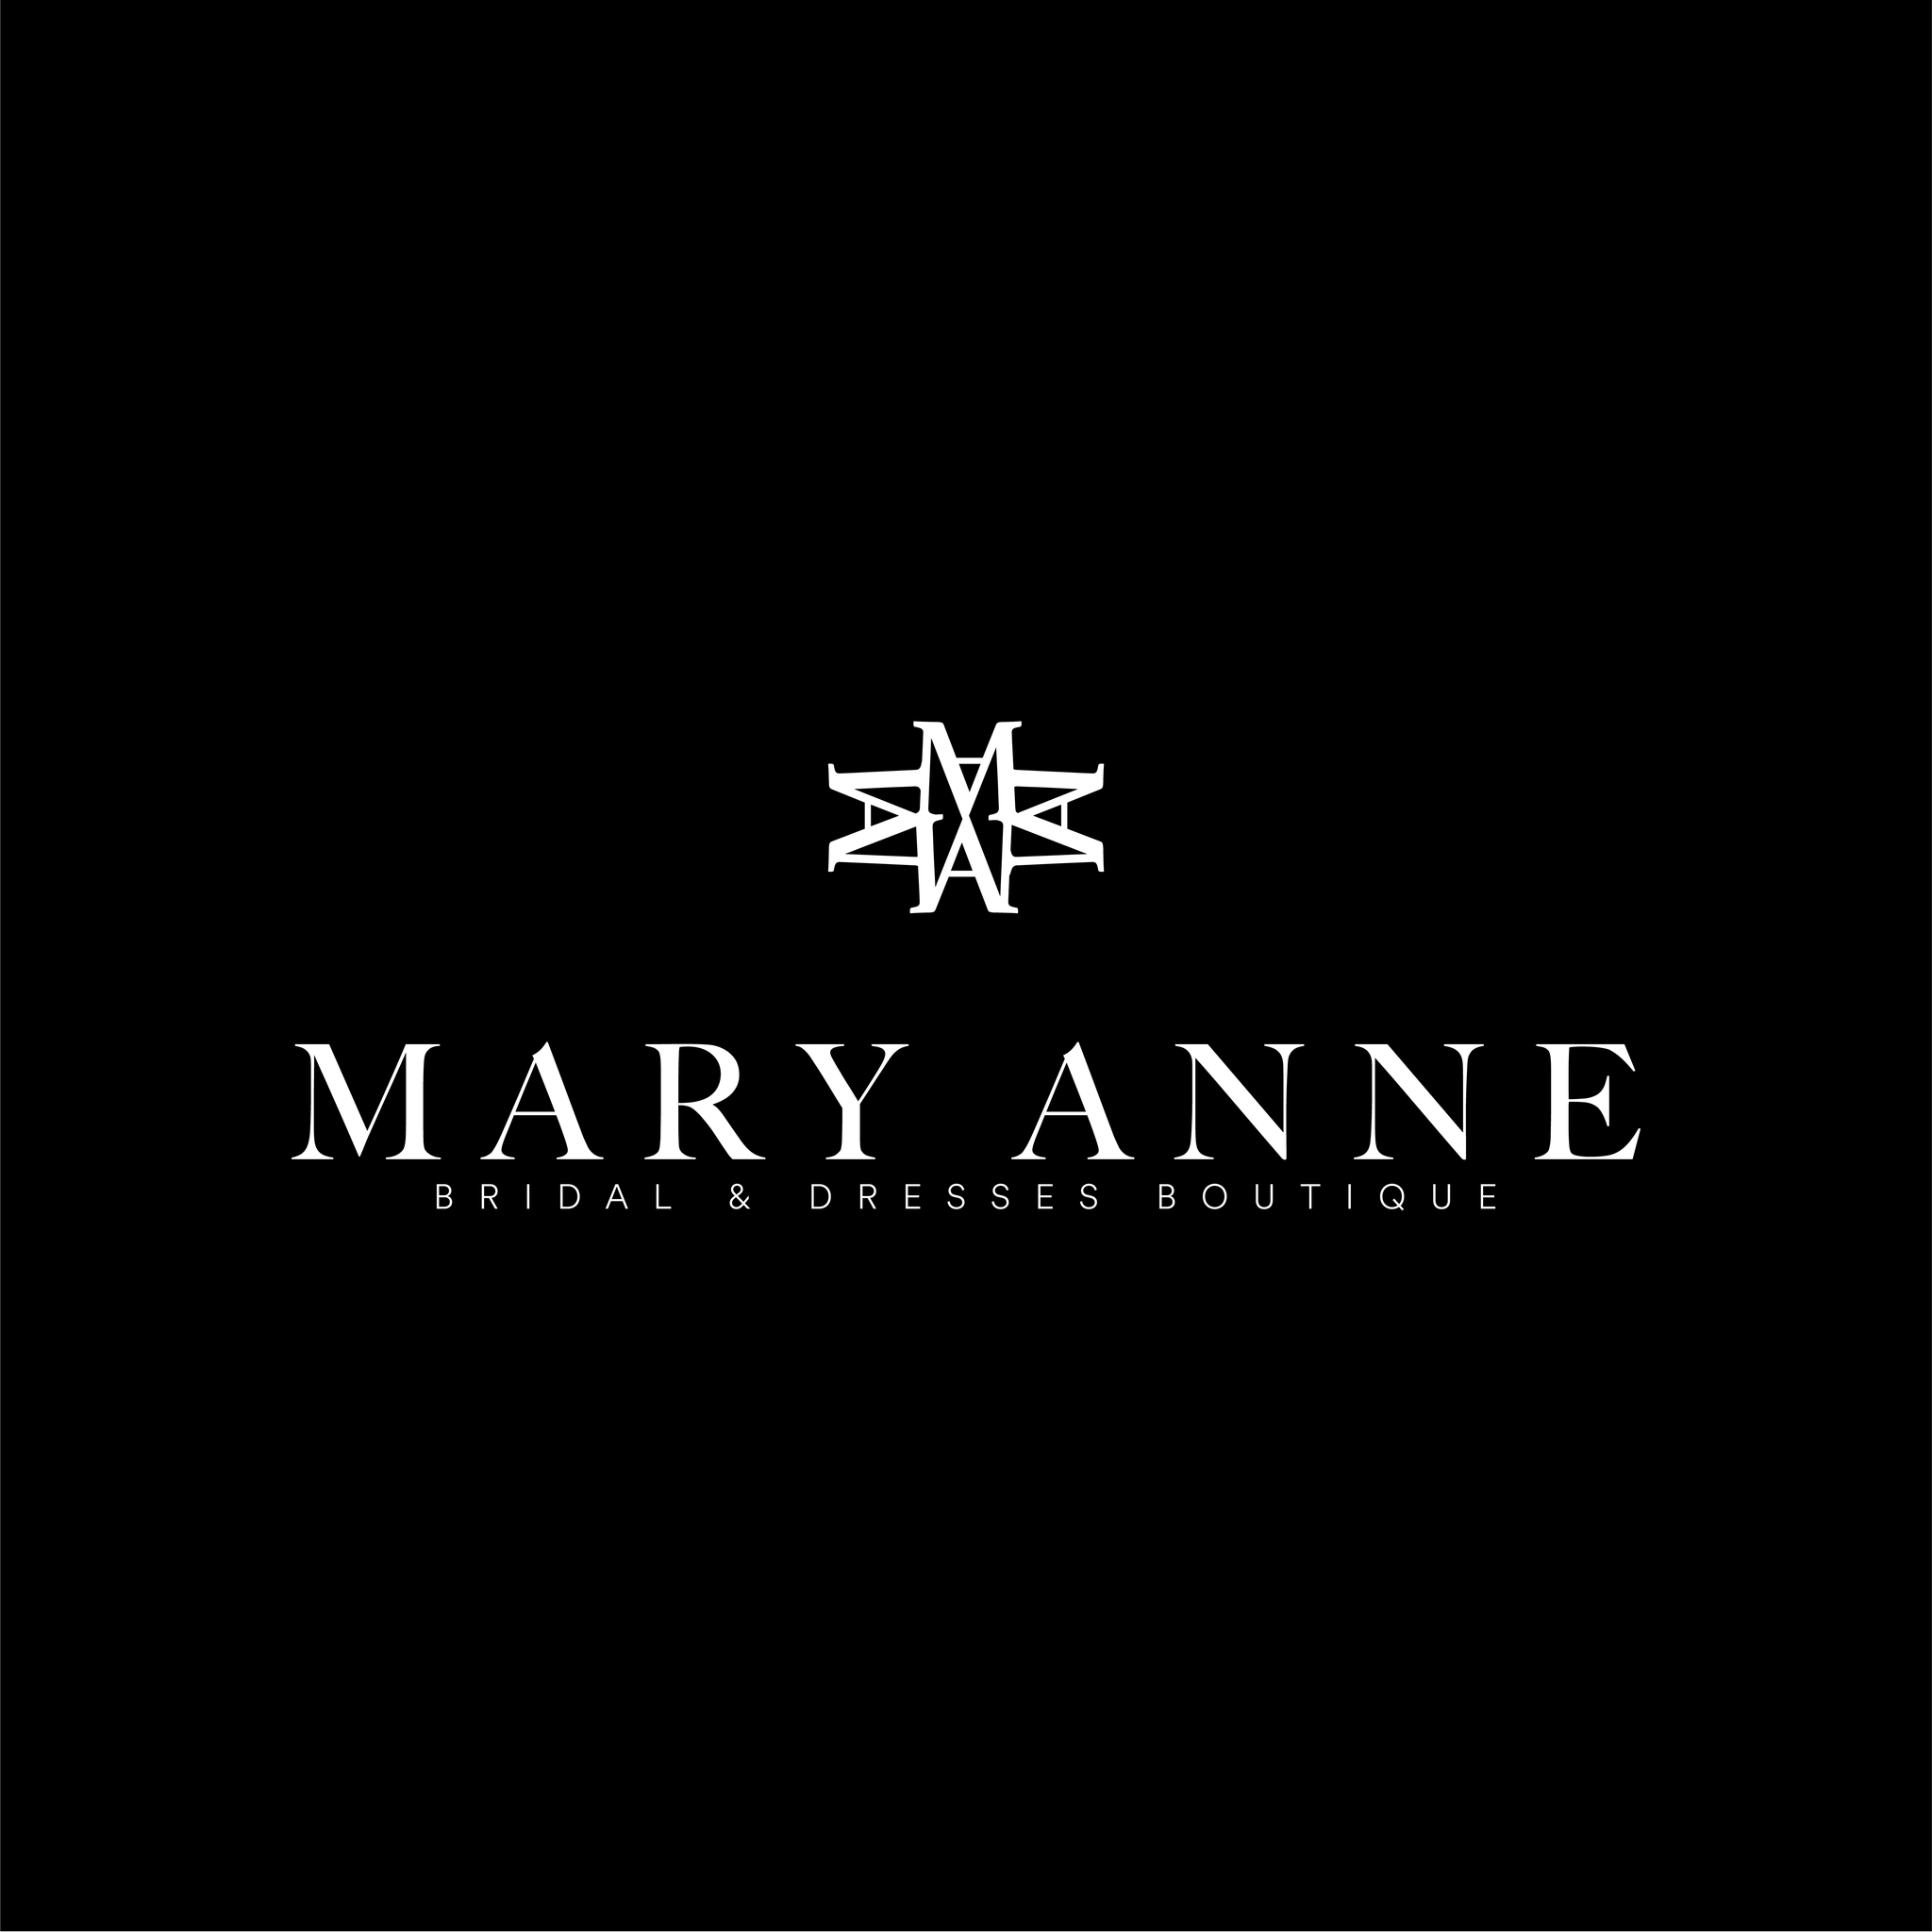 Mary anne